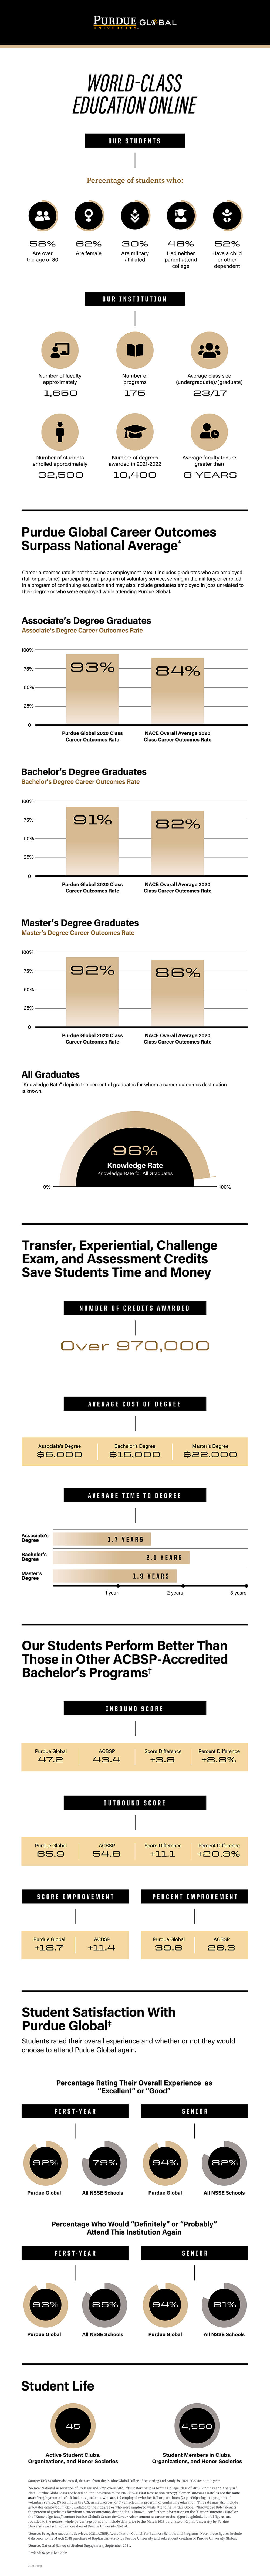 Infographic depicting Purdue Global student and institutional facts and statistics